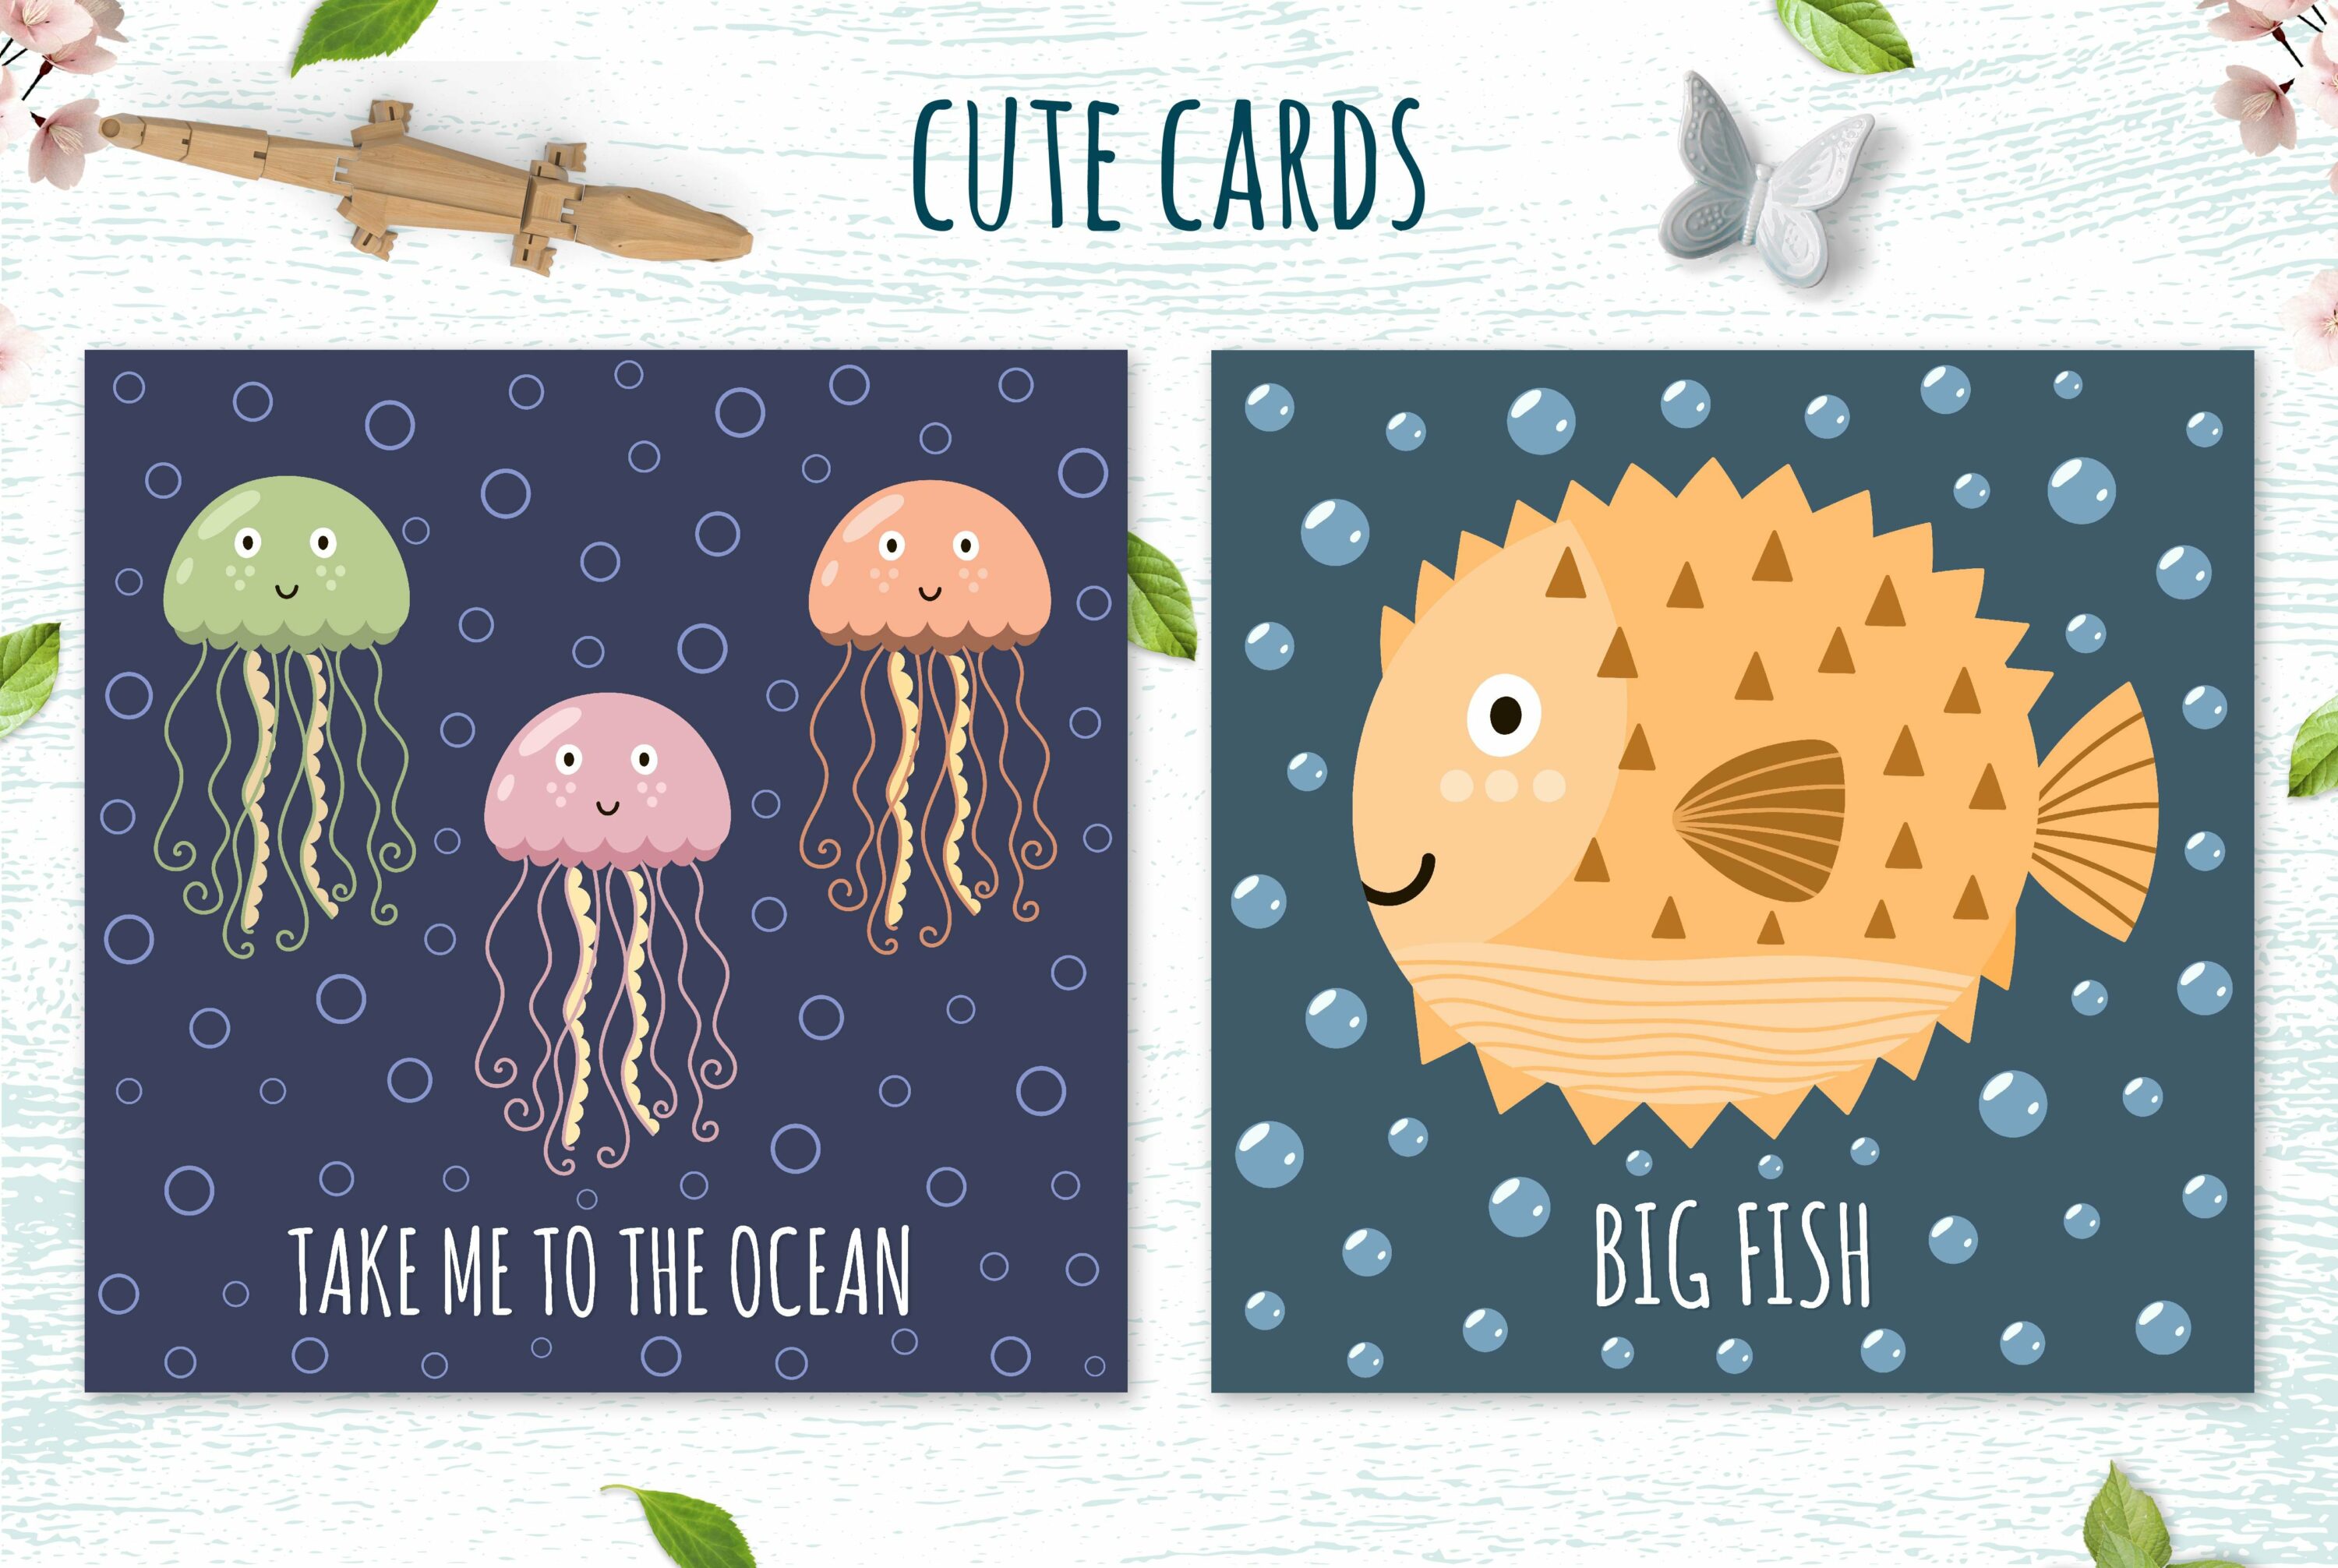 Cute cards with colorful jellyfishes and big fish.